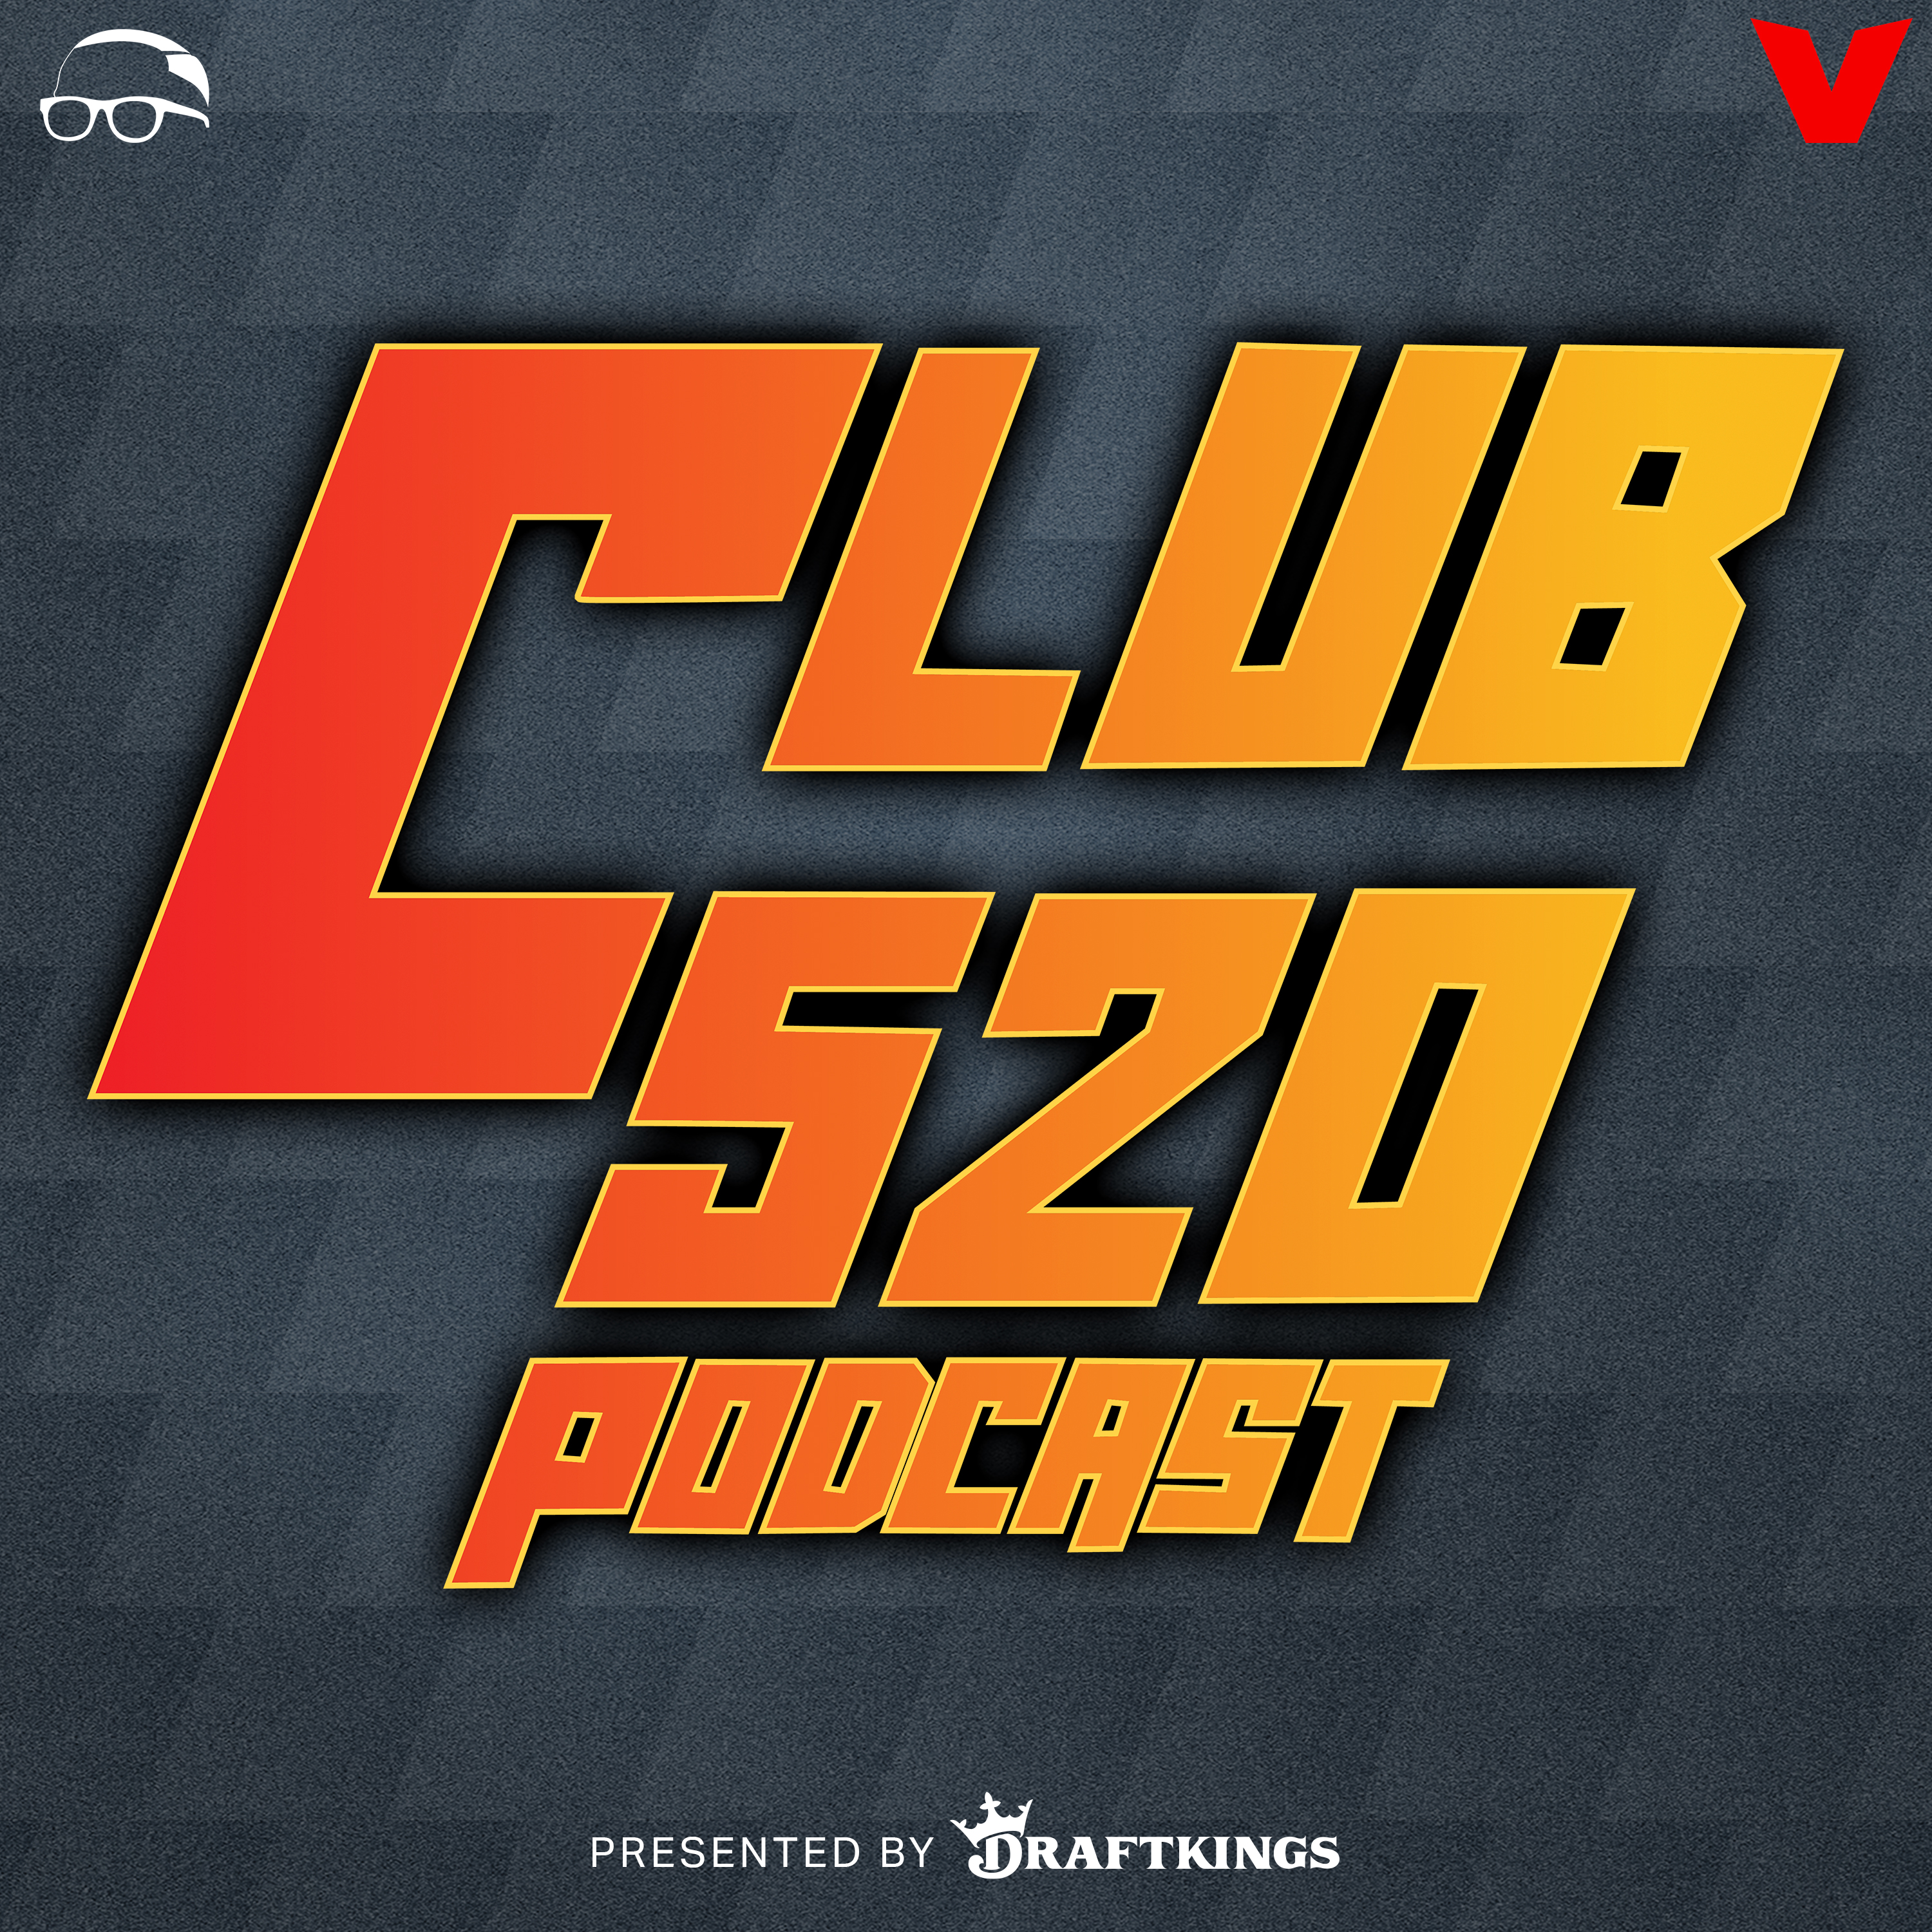 Club 520 - NBA predictions, Jeff’s first NBA game + Better Dad: Lavar Ball or Deion Sanders?